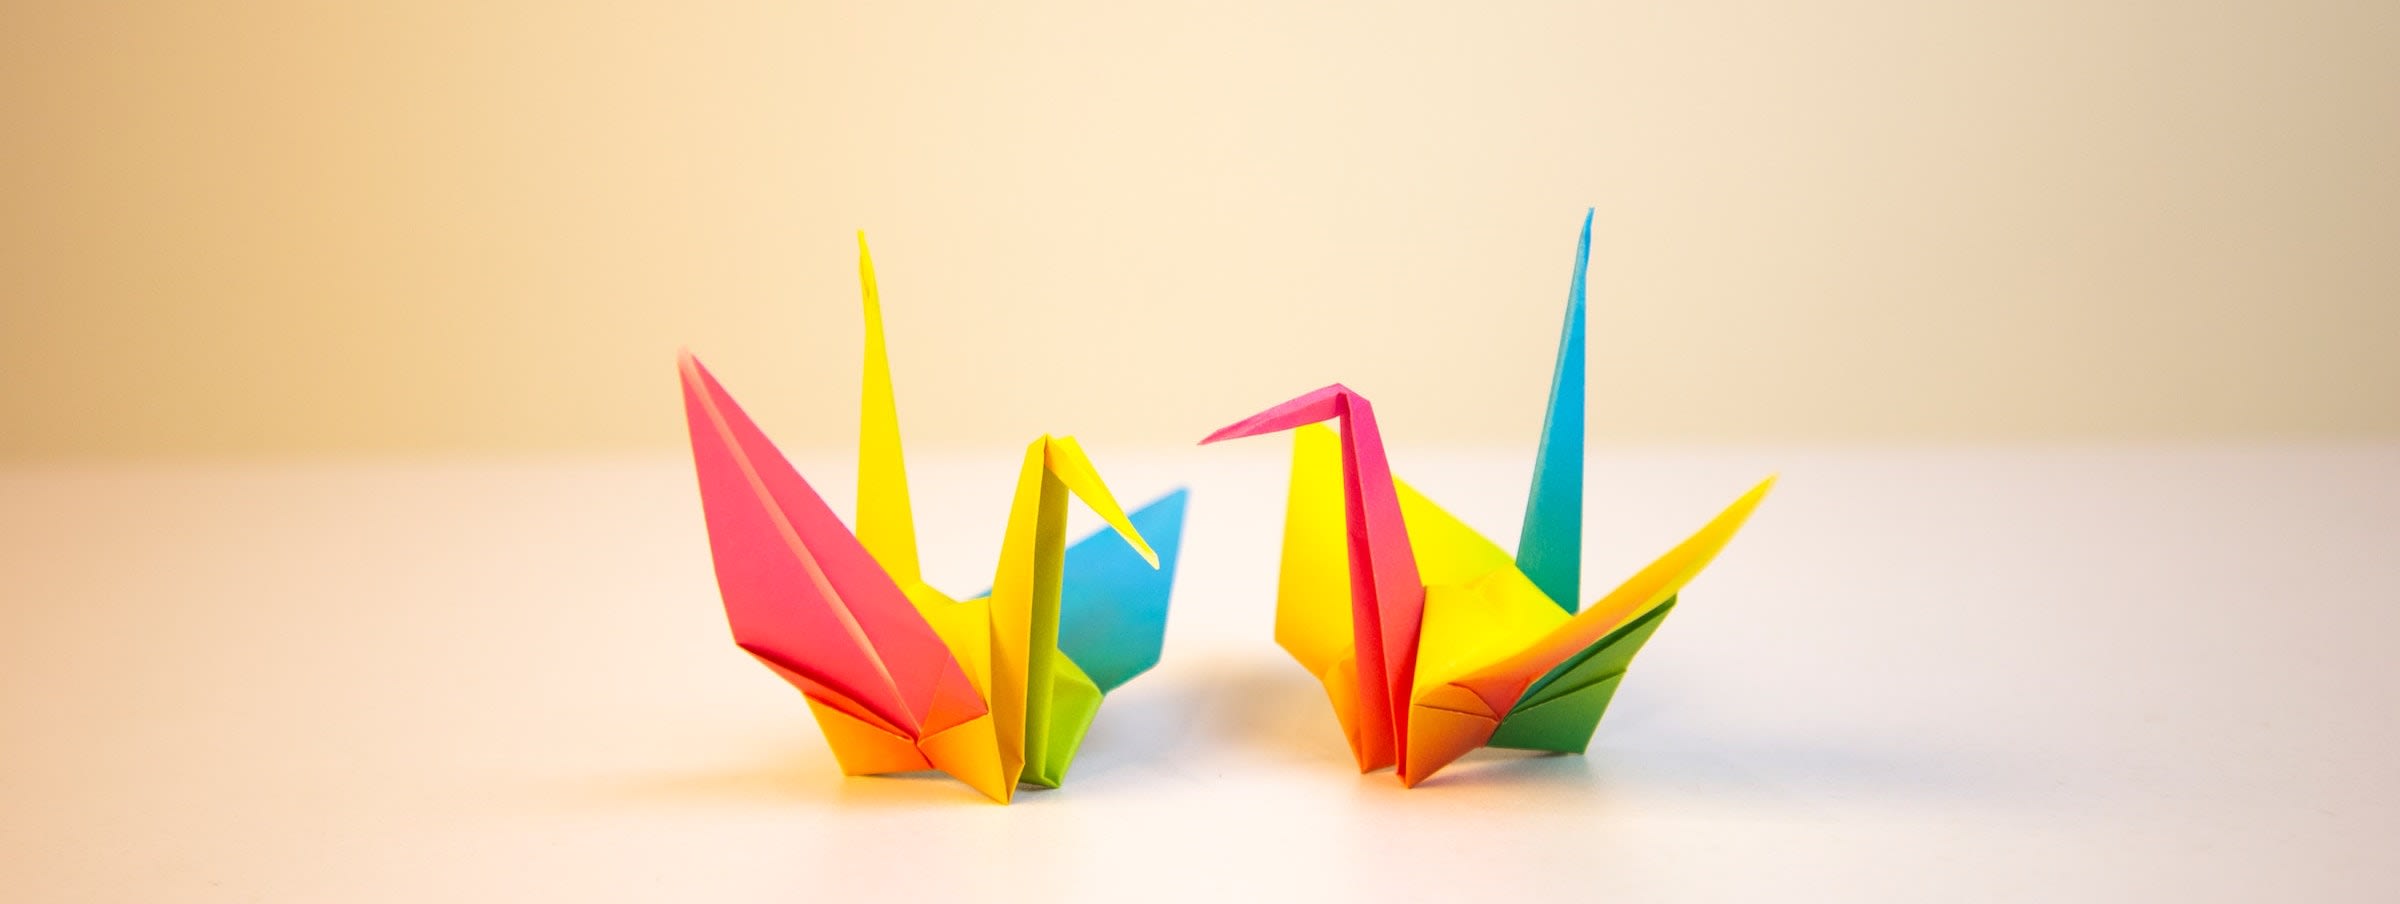 Two colorful origami cranes